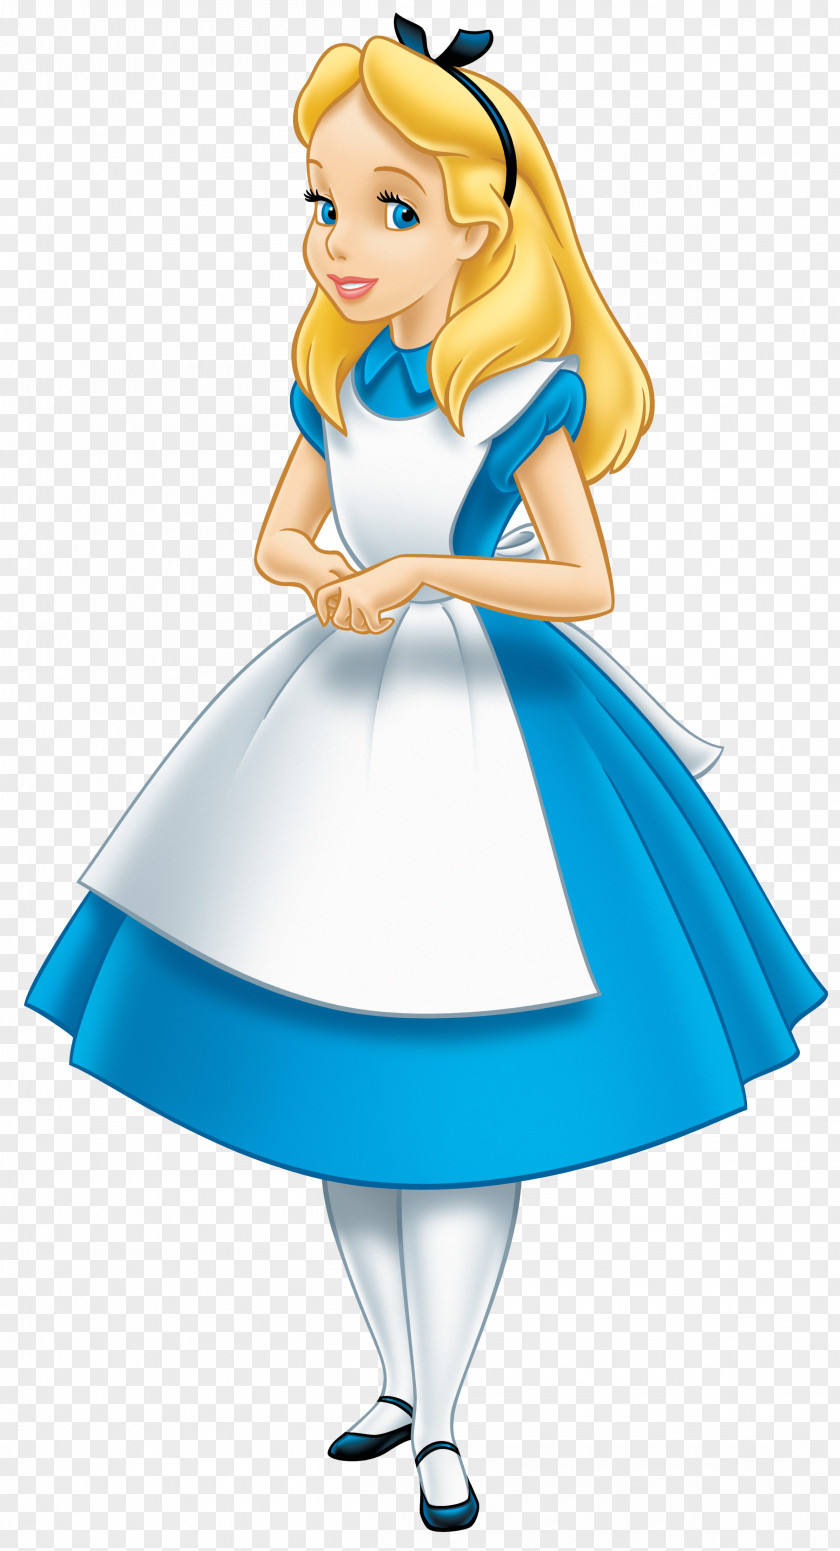 Alice Cliparts In Wonderland Alice's Adventures Queen Of Hearts The Mad Hatter White Rabbit PNG